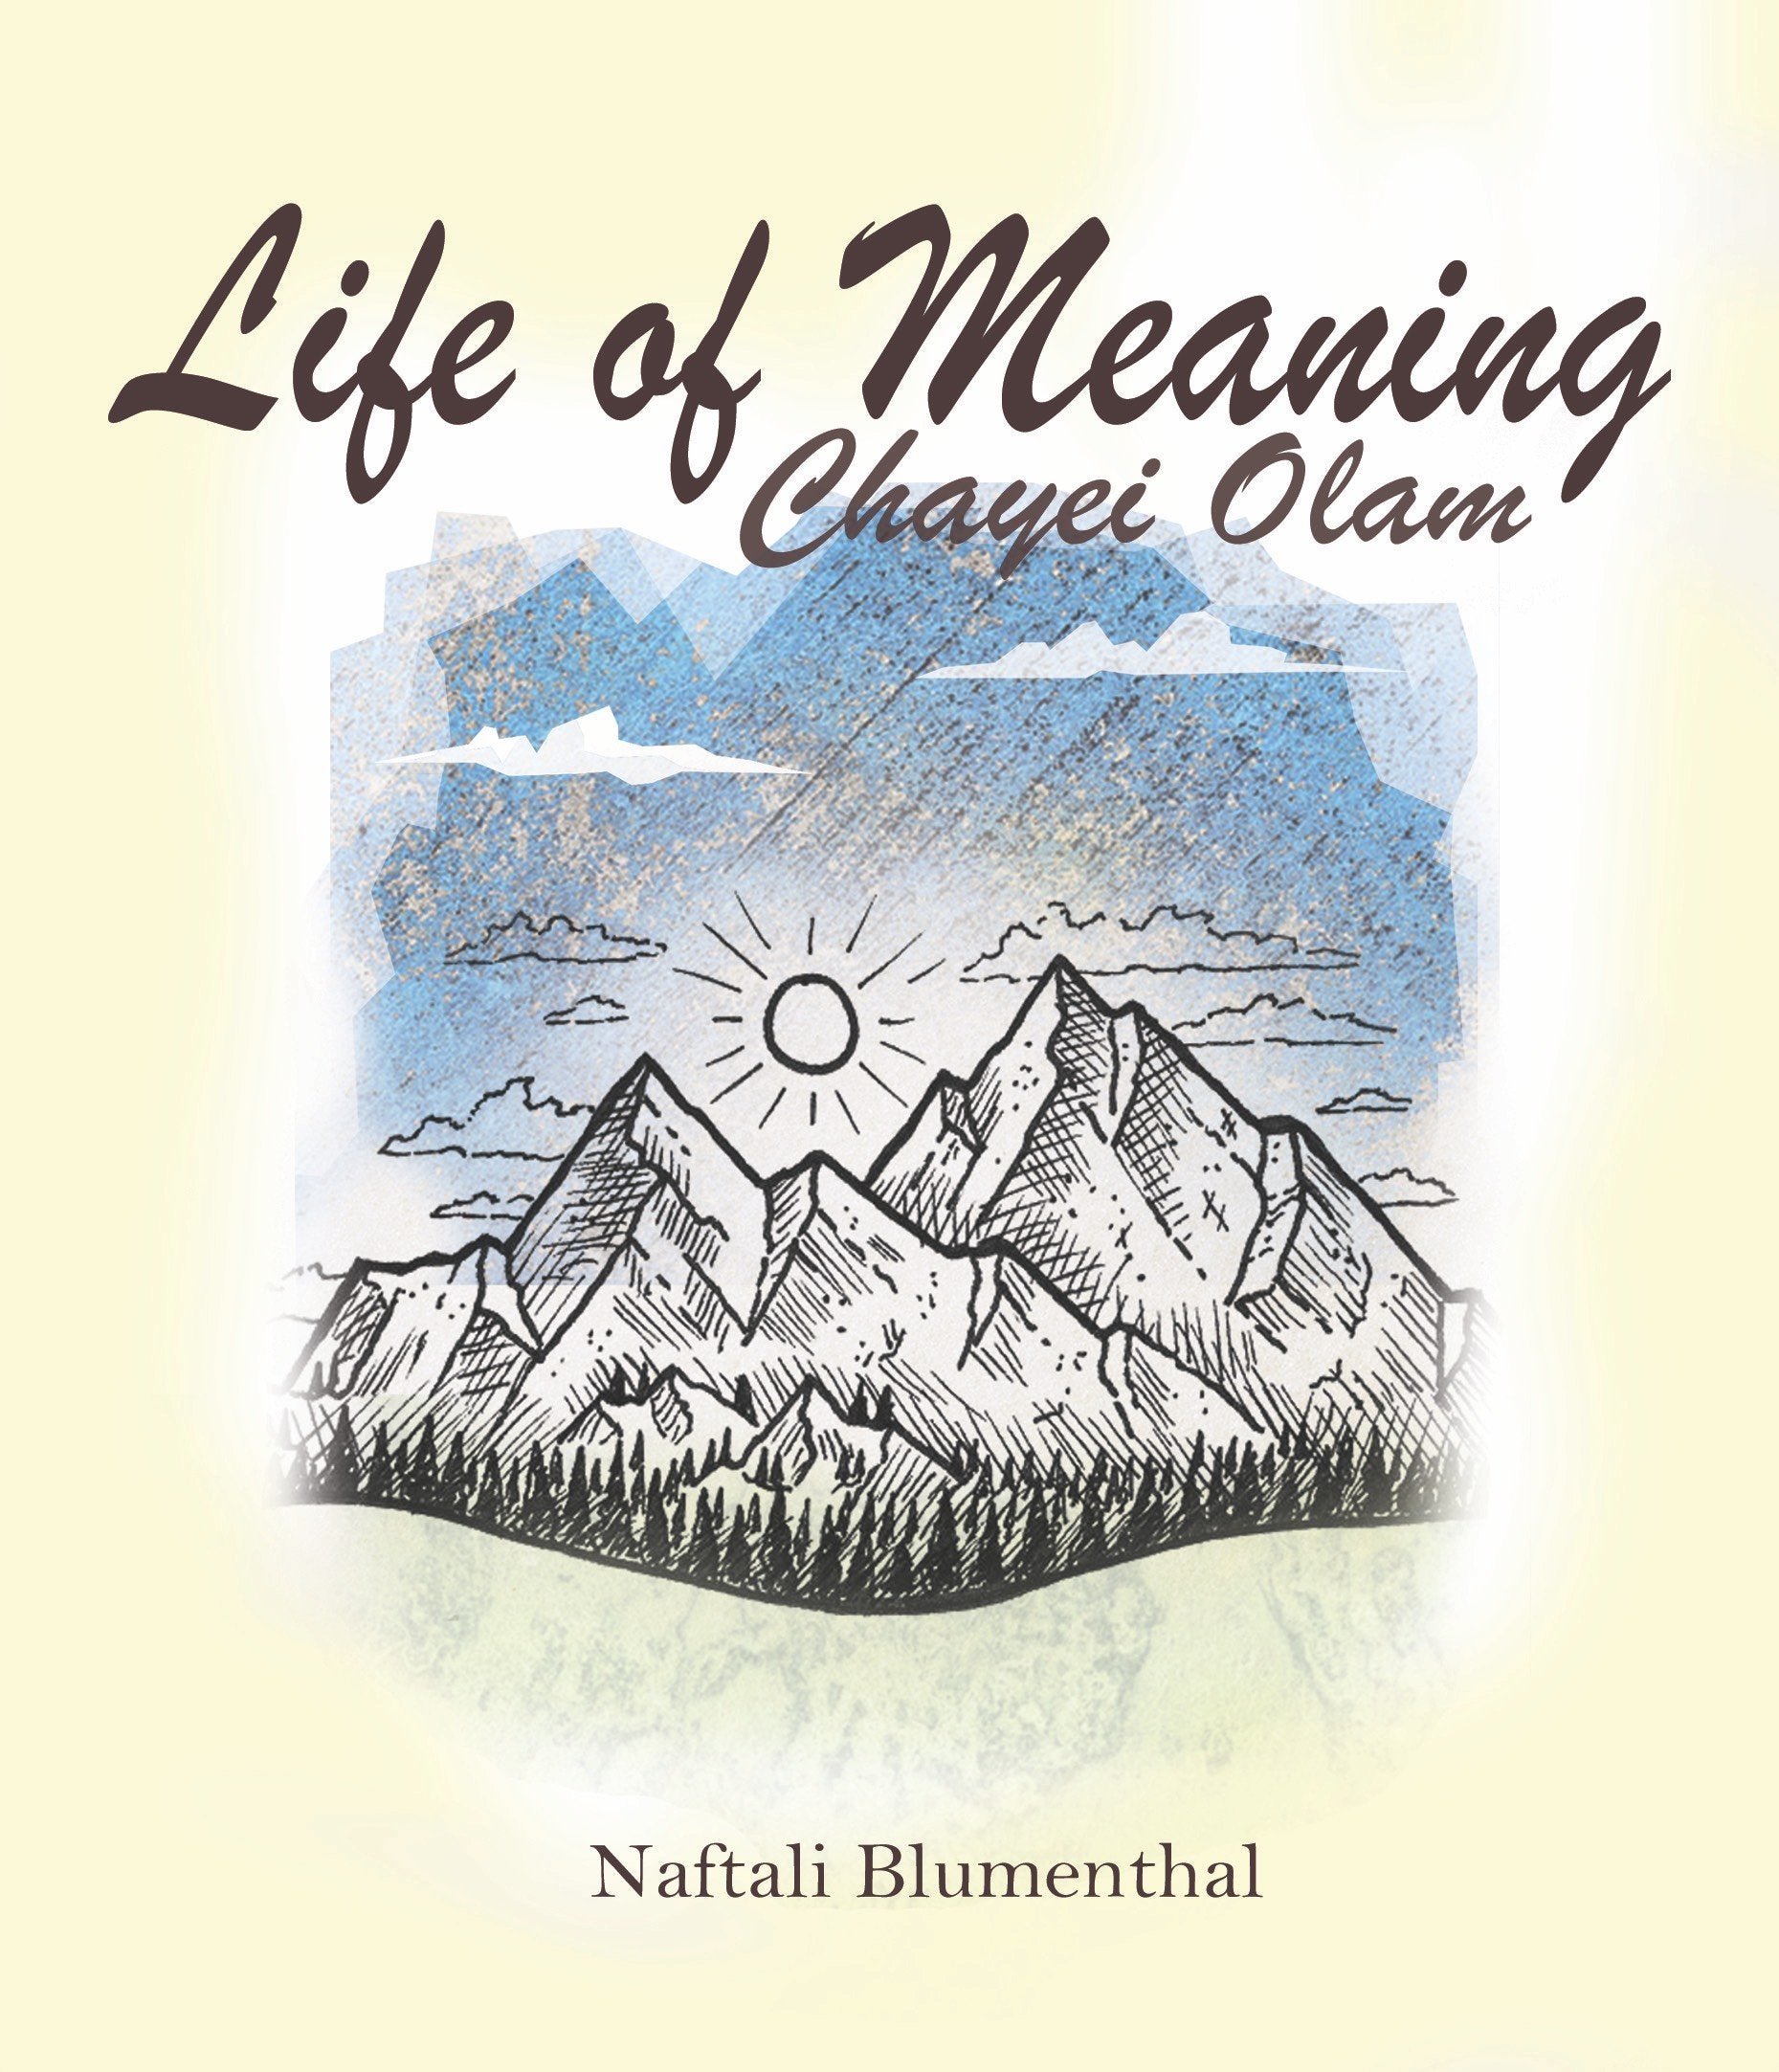 Naftali Blumenthal - Life of Meaning (Chayei Olam)